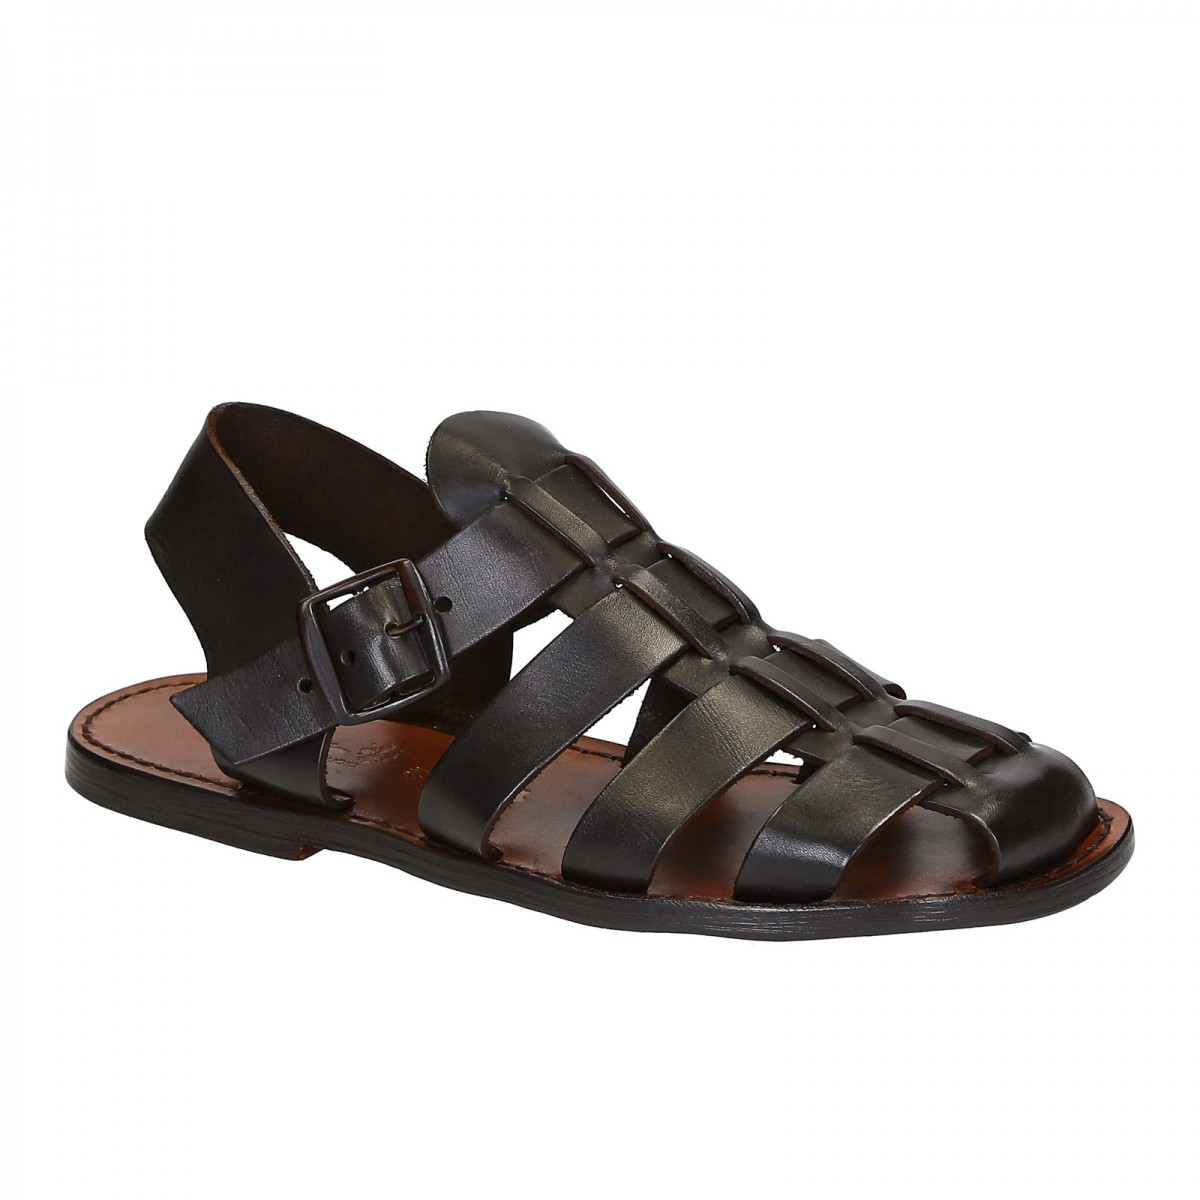 Handmade in Italy mens Franciscan sandals in dark brown leather | The  leather craftsmen